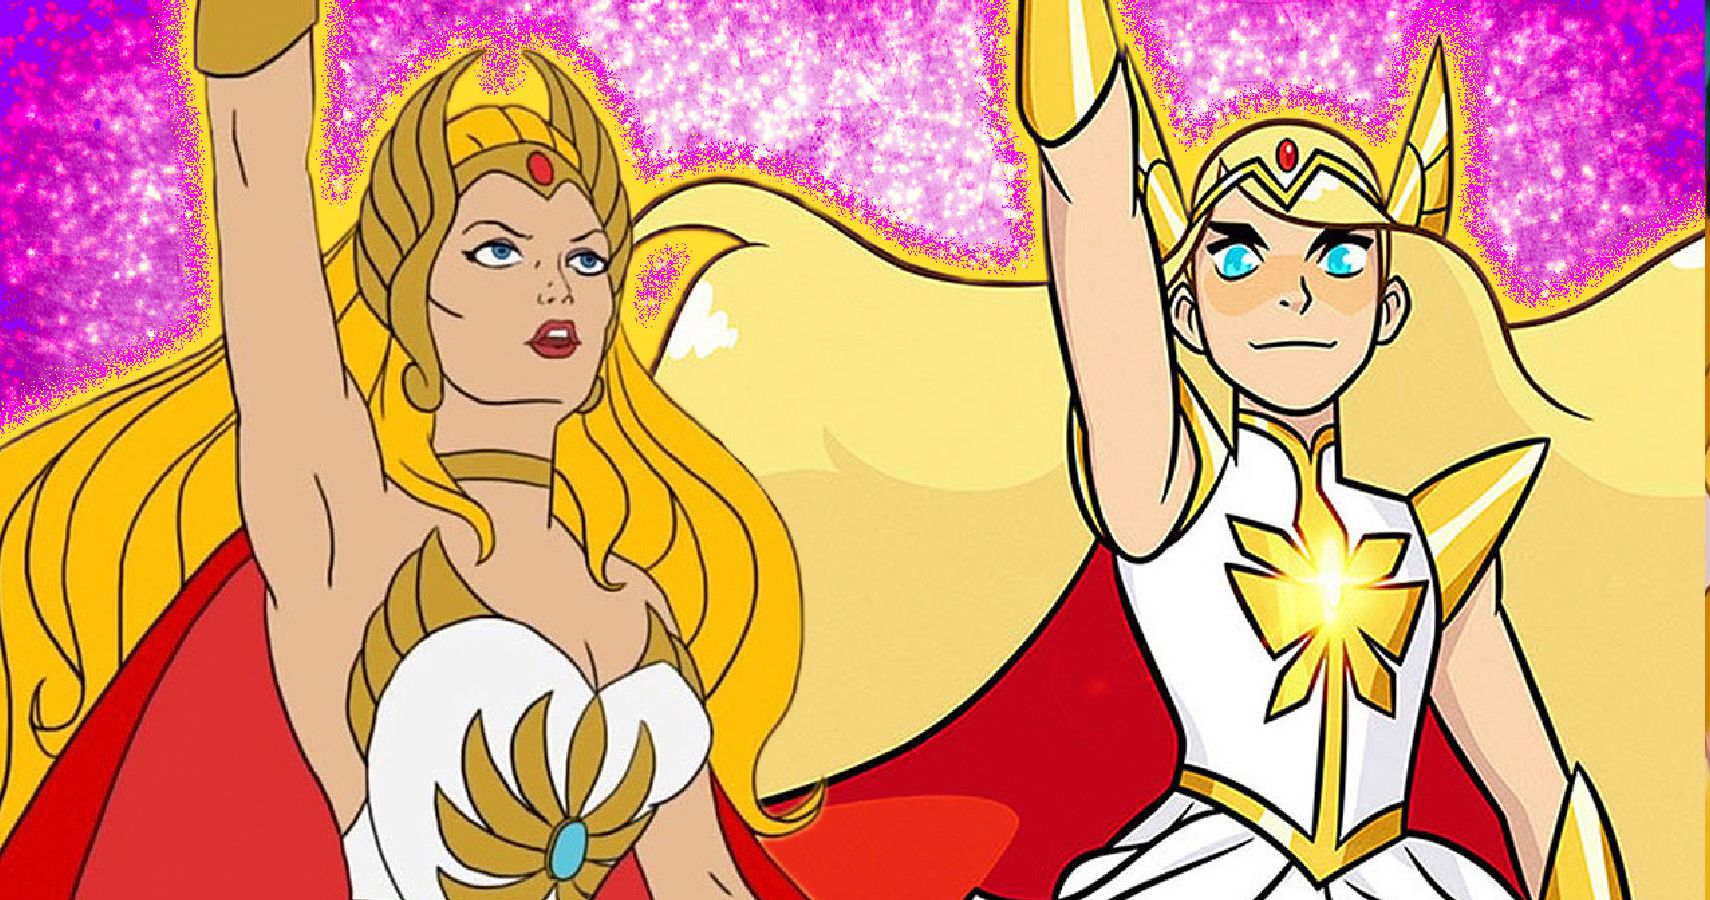 He-Man: 23 Weird Things Only Super Fans Know About She-Ra's Anatomy